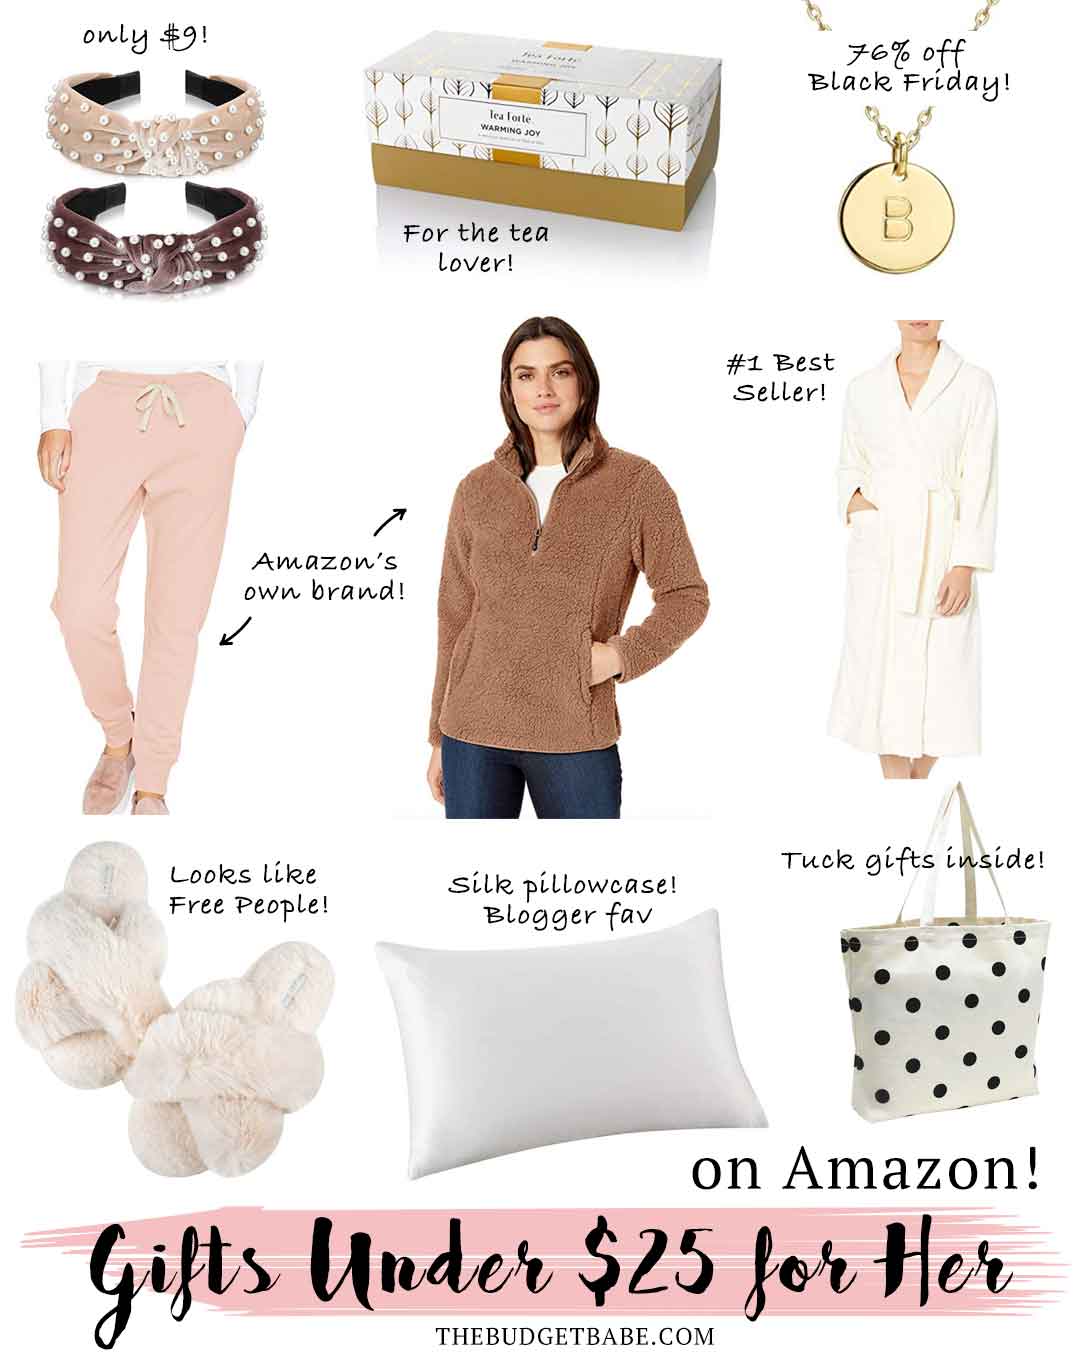 Holiday Gift Ideas Under $25 for Her on Amazon.com!